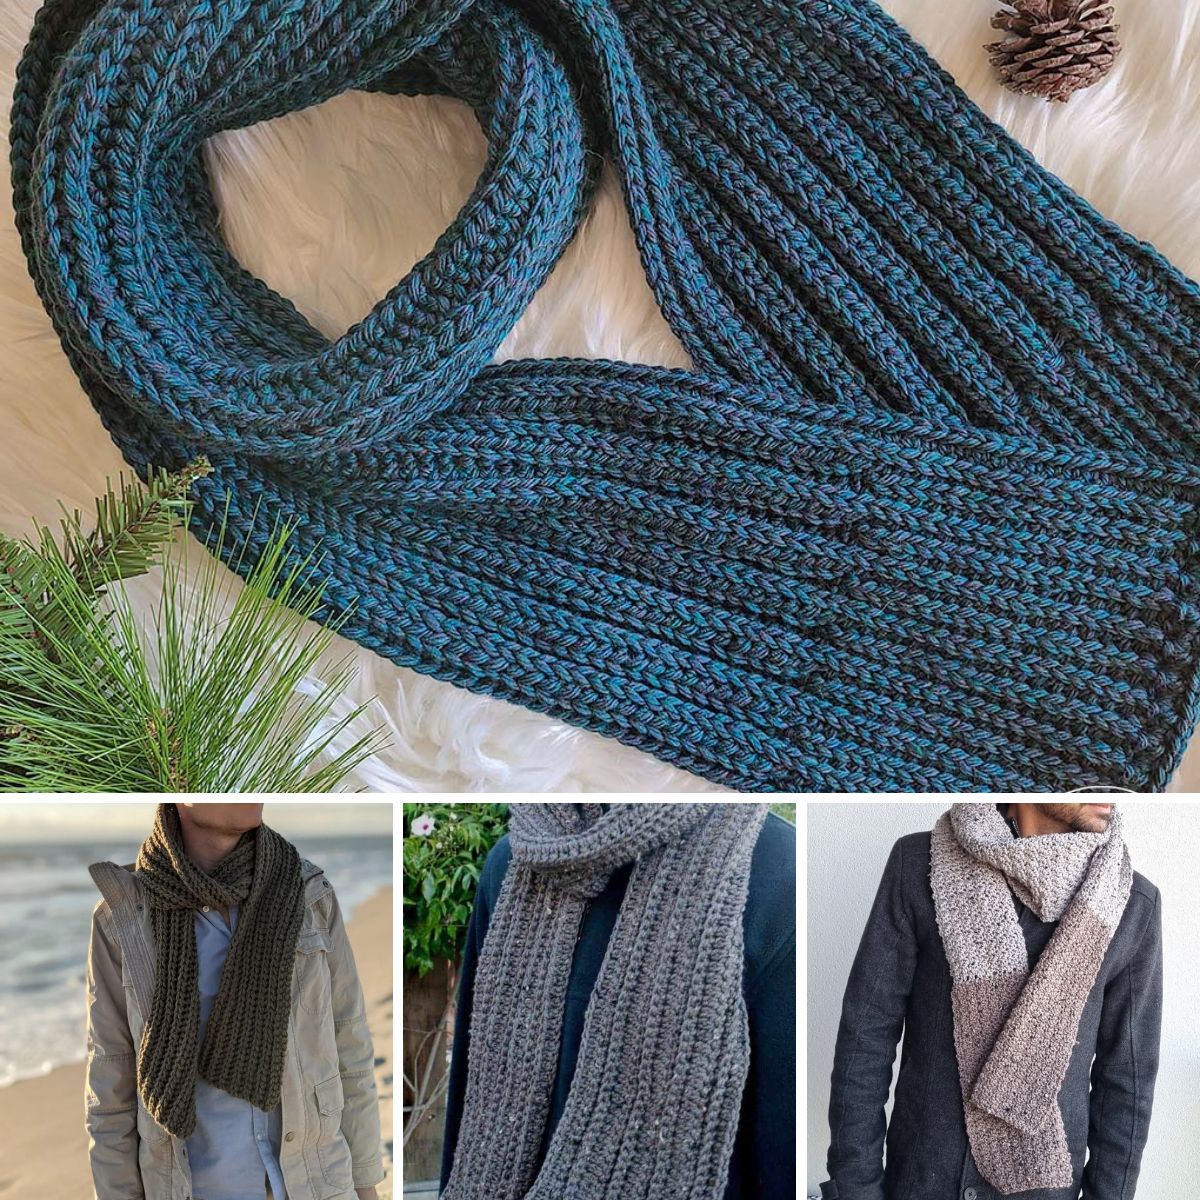 25 Crochet Gift Ideas for Guys With Free Patterns! - YouTube